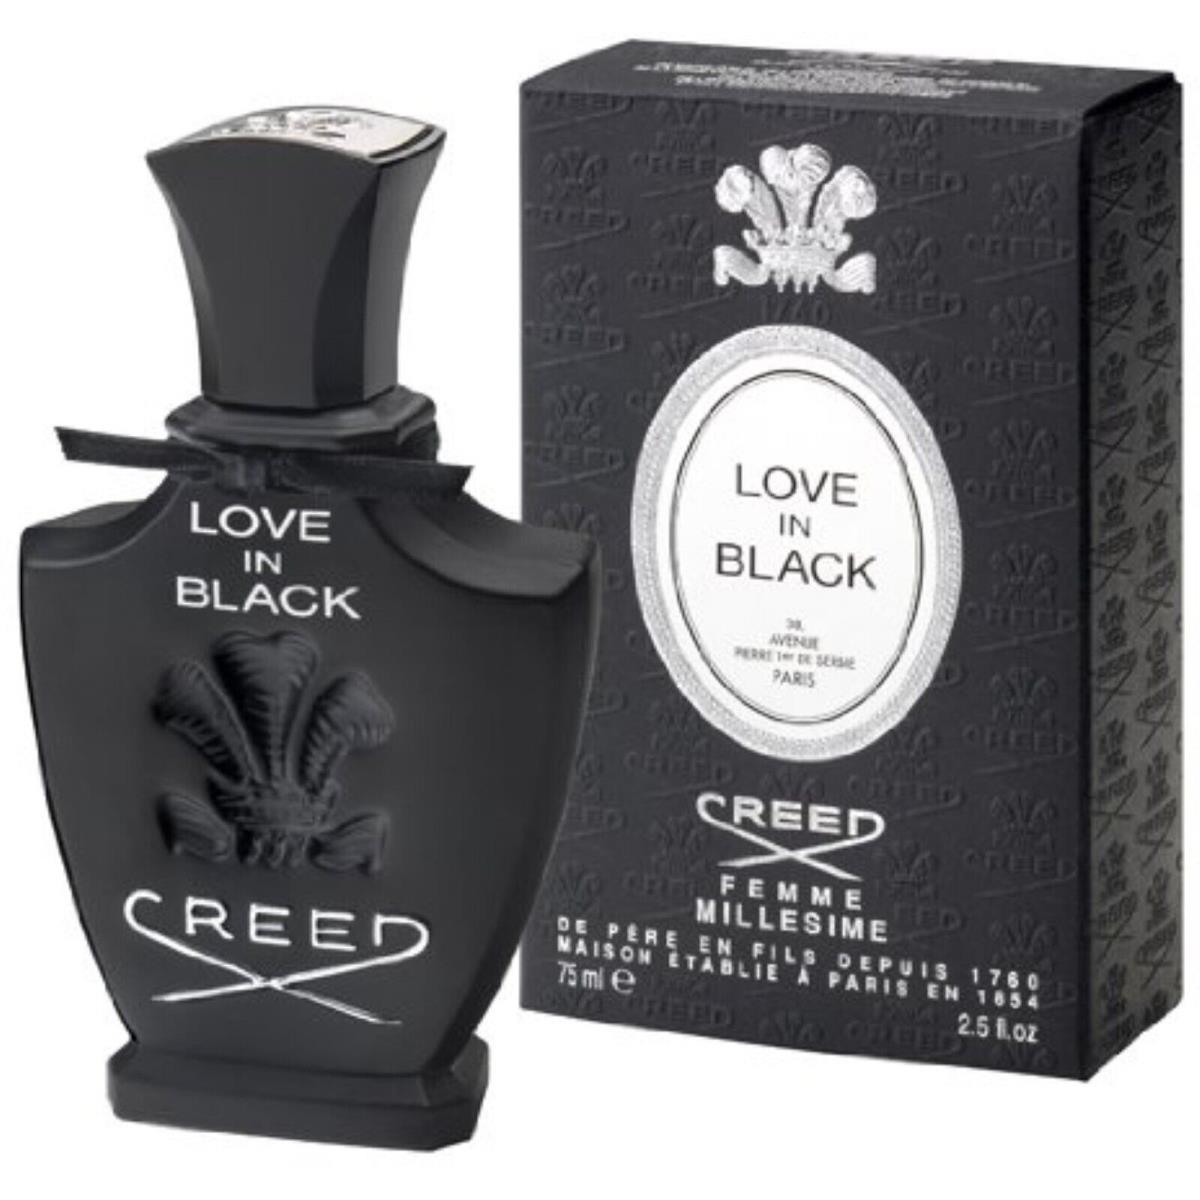 Creed Love in Black by Creed 2.5 oz Edp Perfume Spray For Women Box